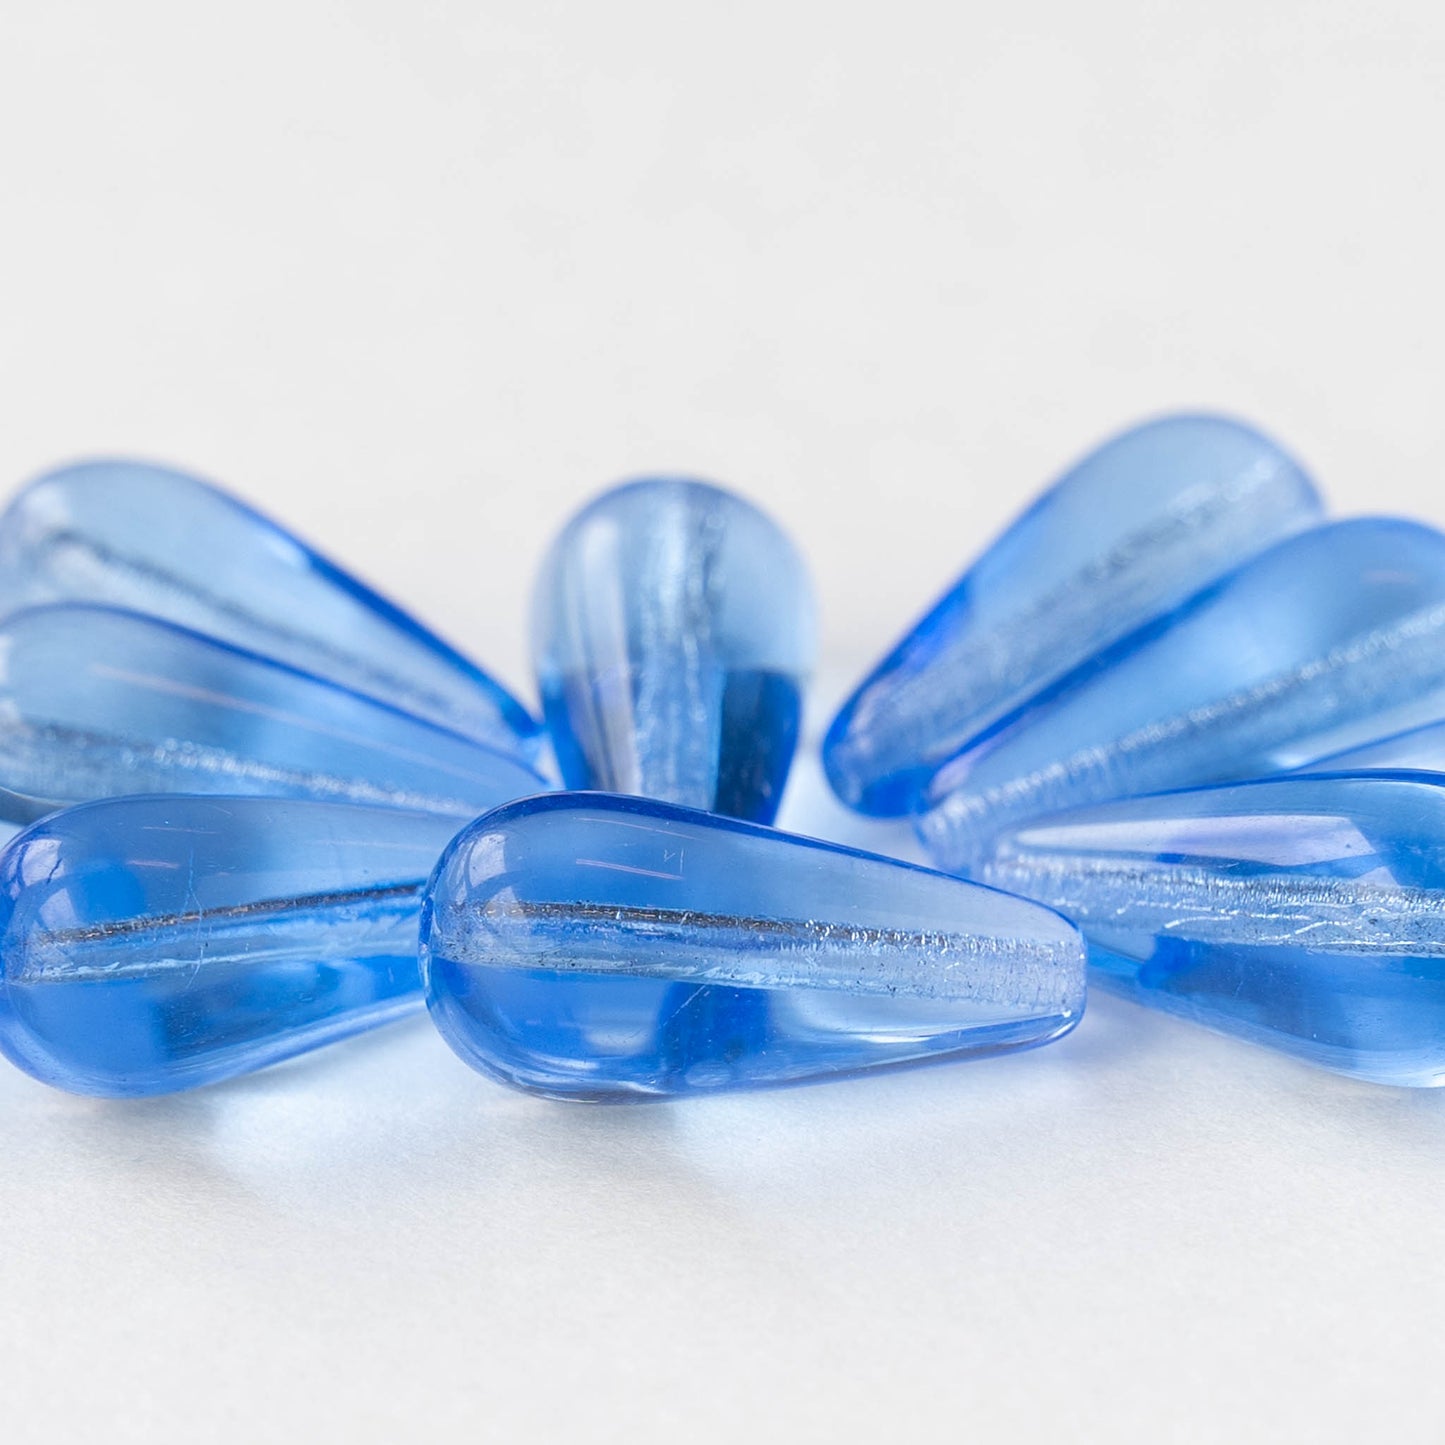 9x20mm Long Drilled Drops - Sapphire Blue - 20 Beads